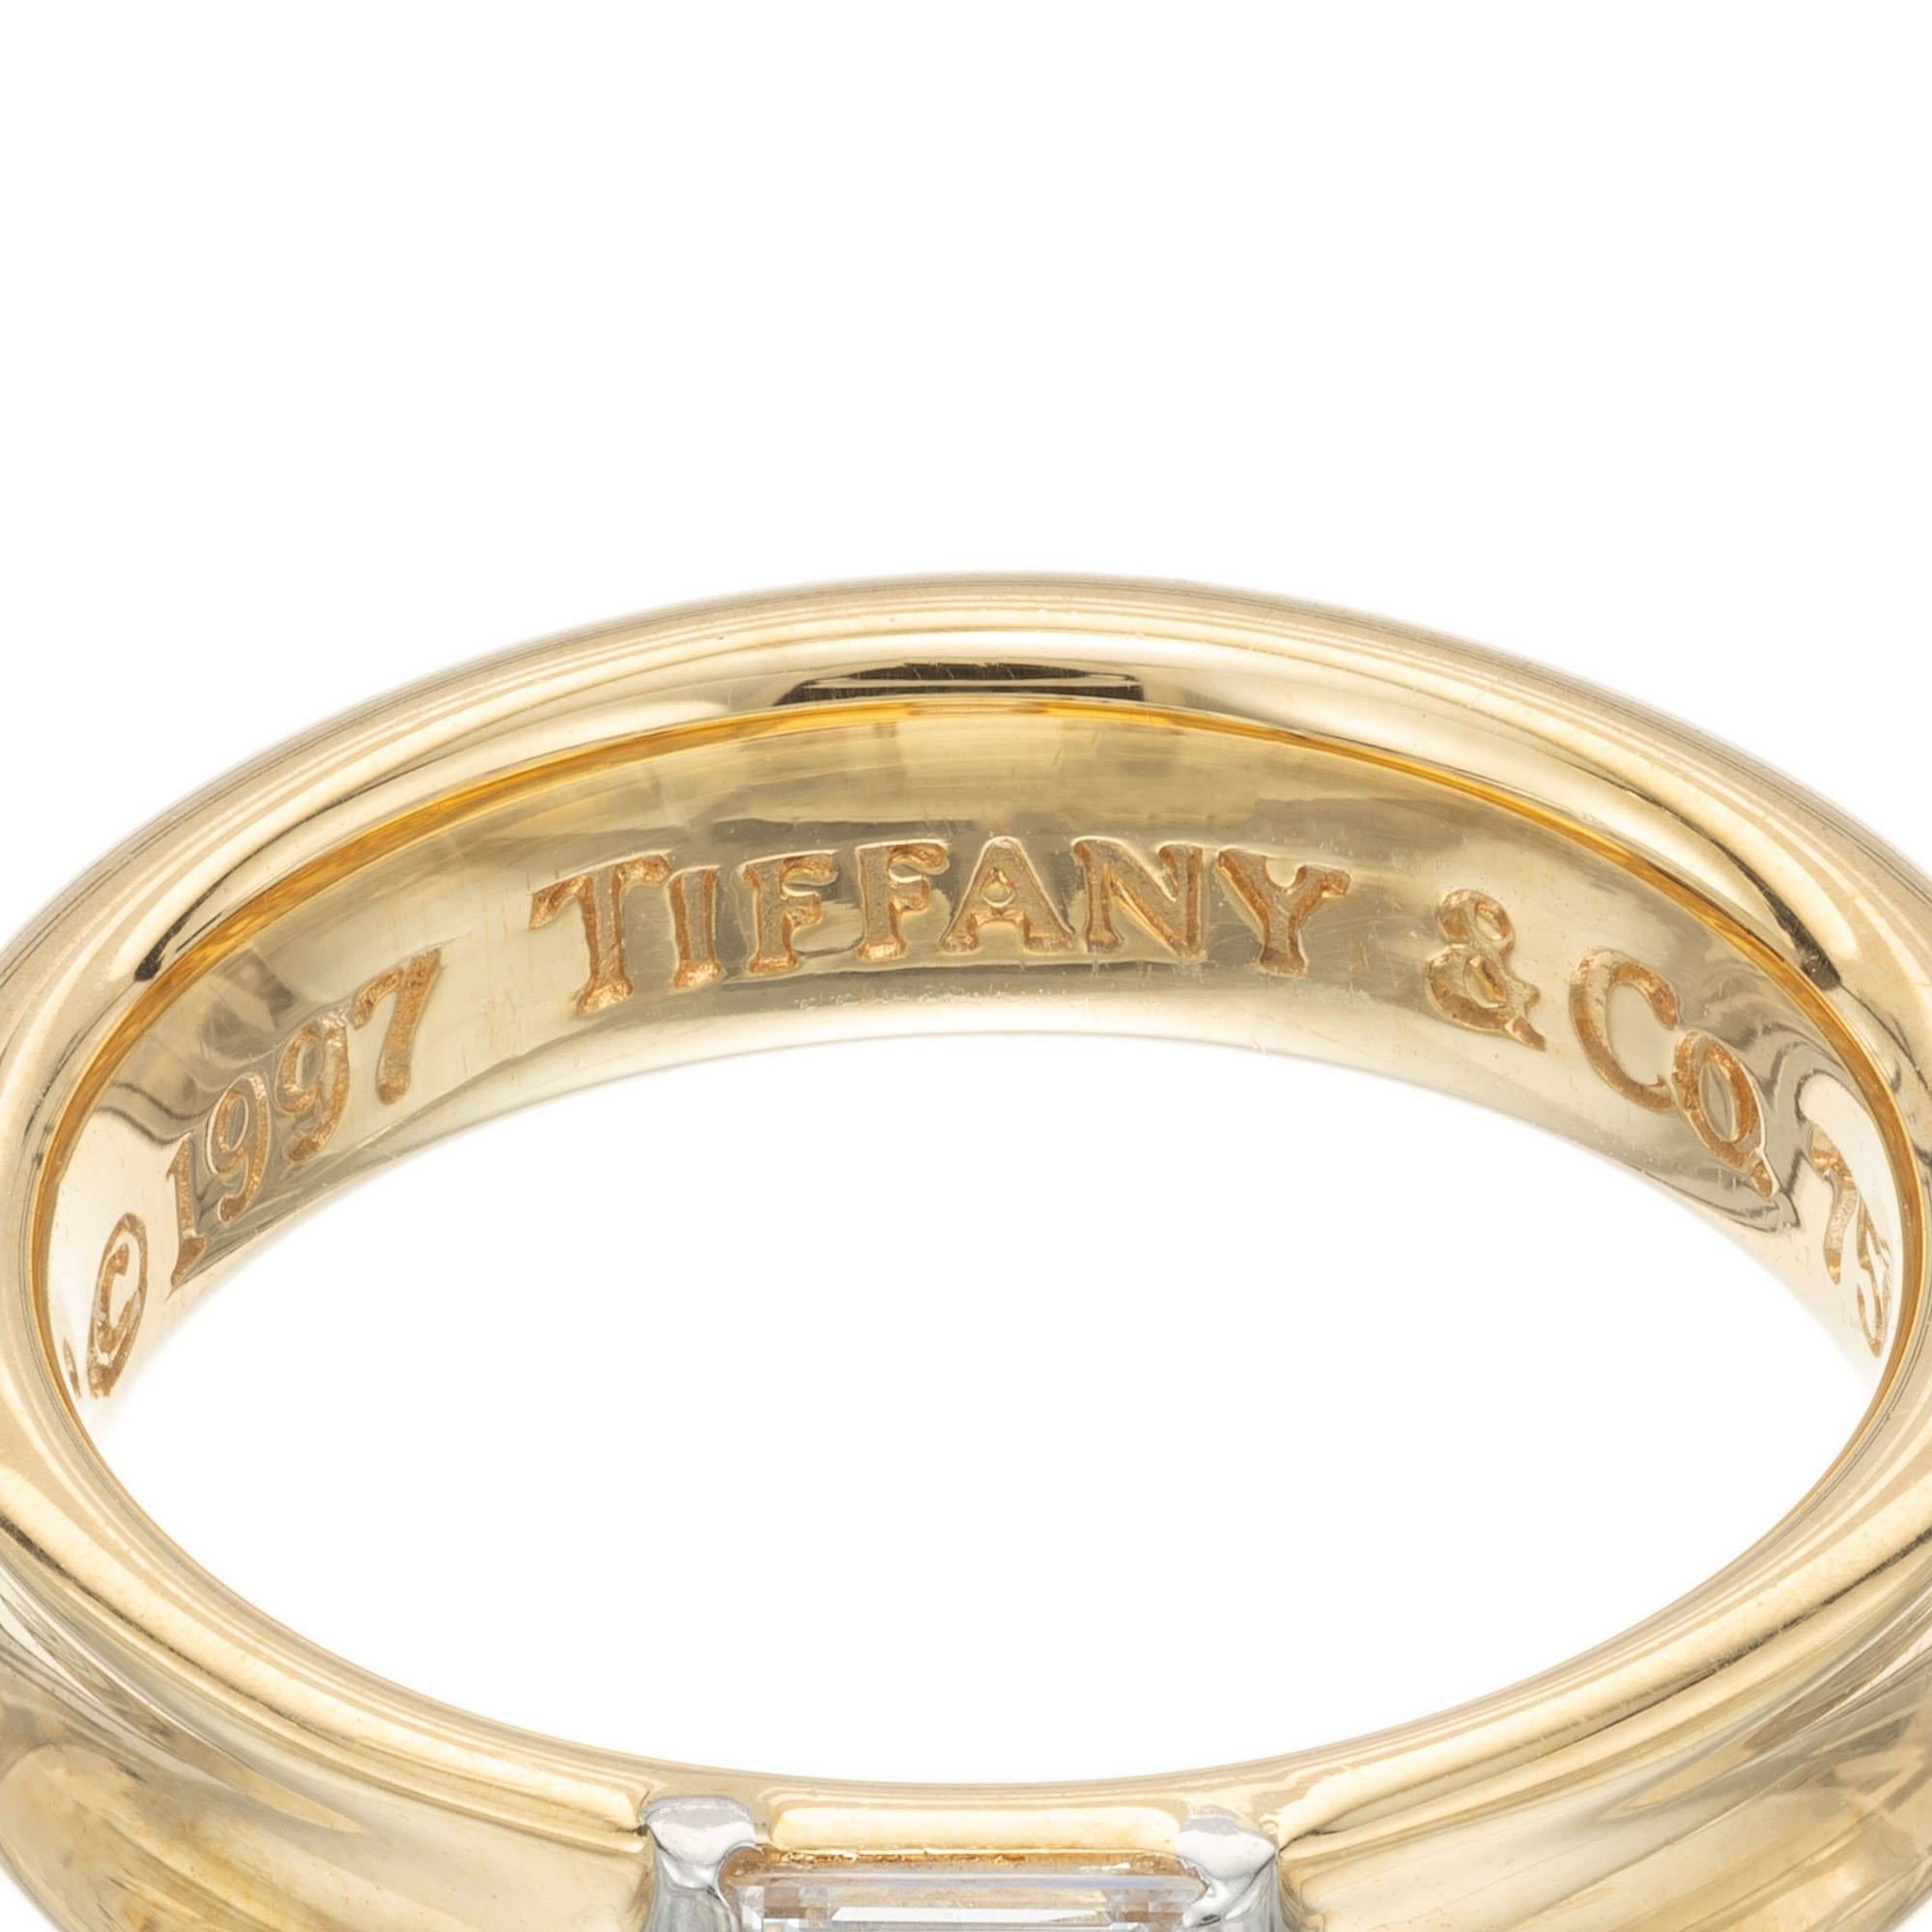 Women's Tiffany & Co .24 Carat Diamond Yellow Gold Stackable Band Ring